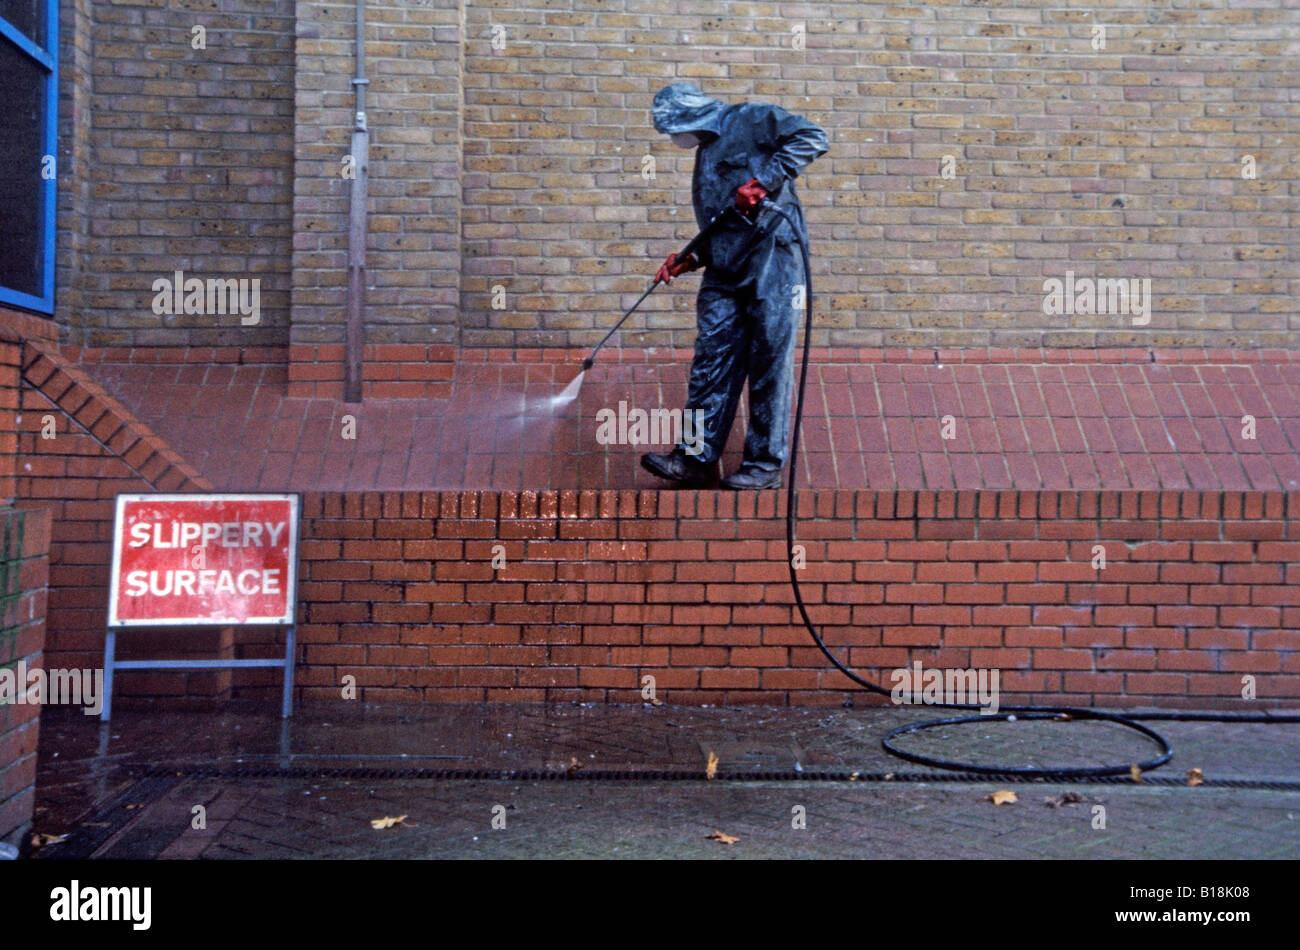 Council worker spray cleaning pigeon droppings from building in Greenwich, London, England, UK Stock Photo